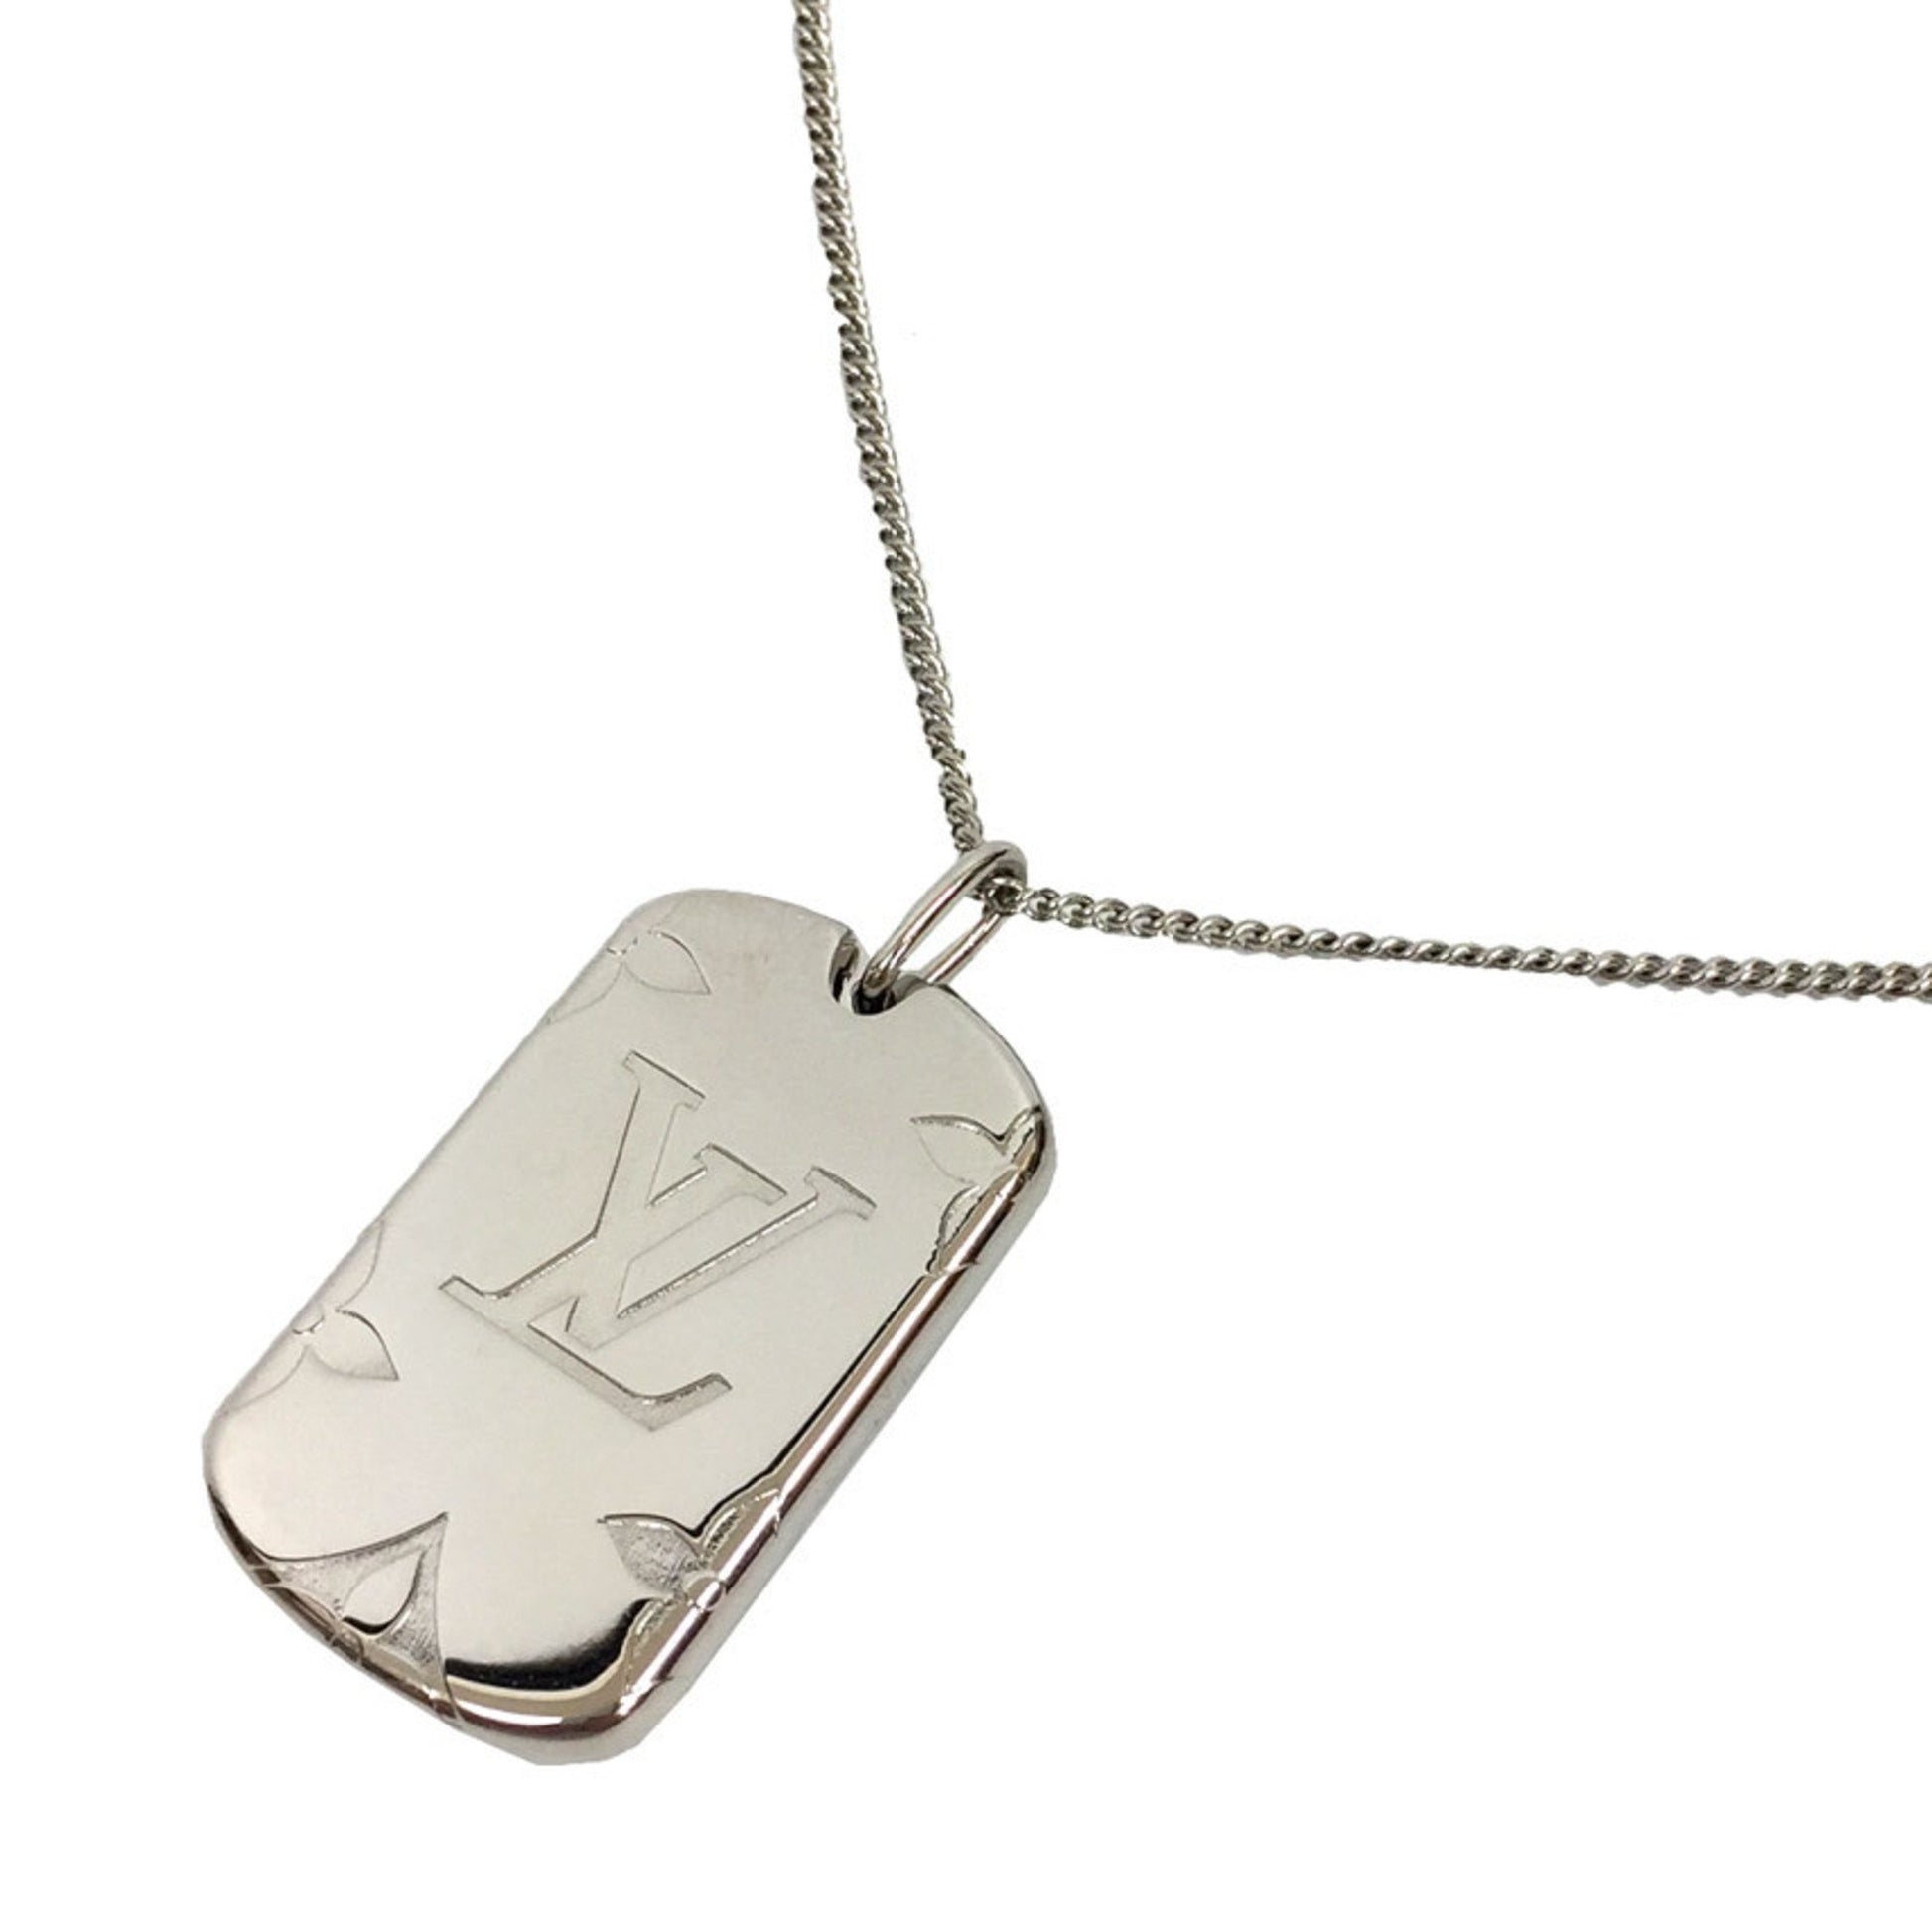 Shop Louis Vuitton Monogram carved necklace (M62484) by lifeisfun